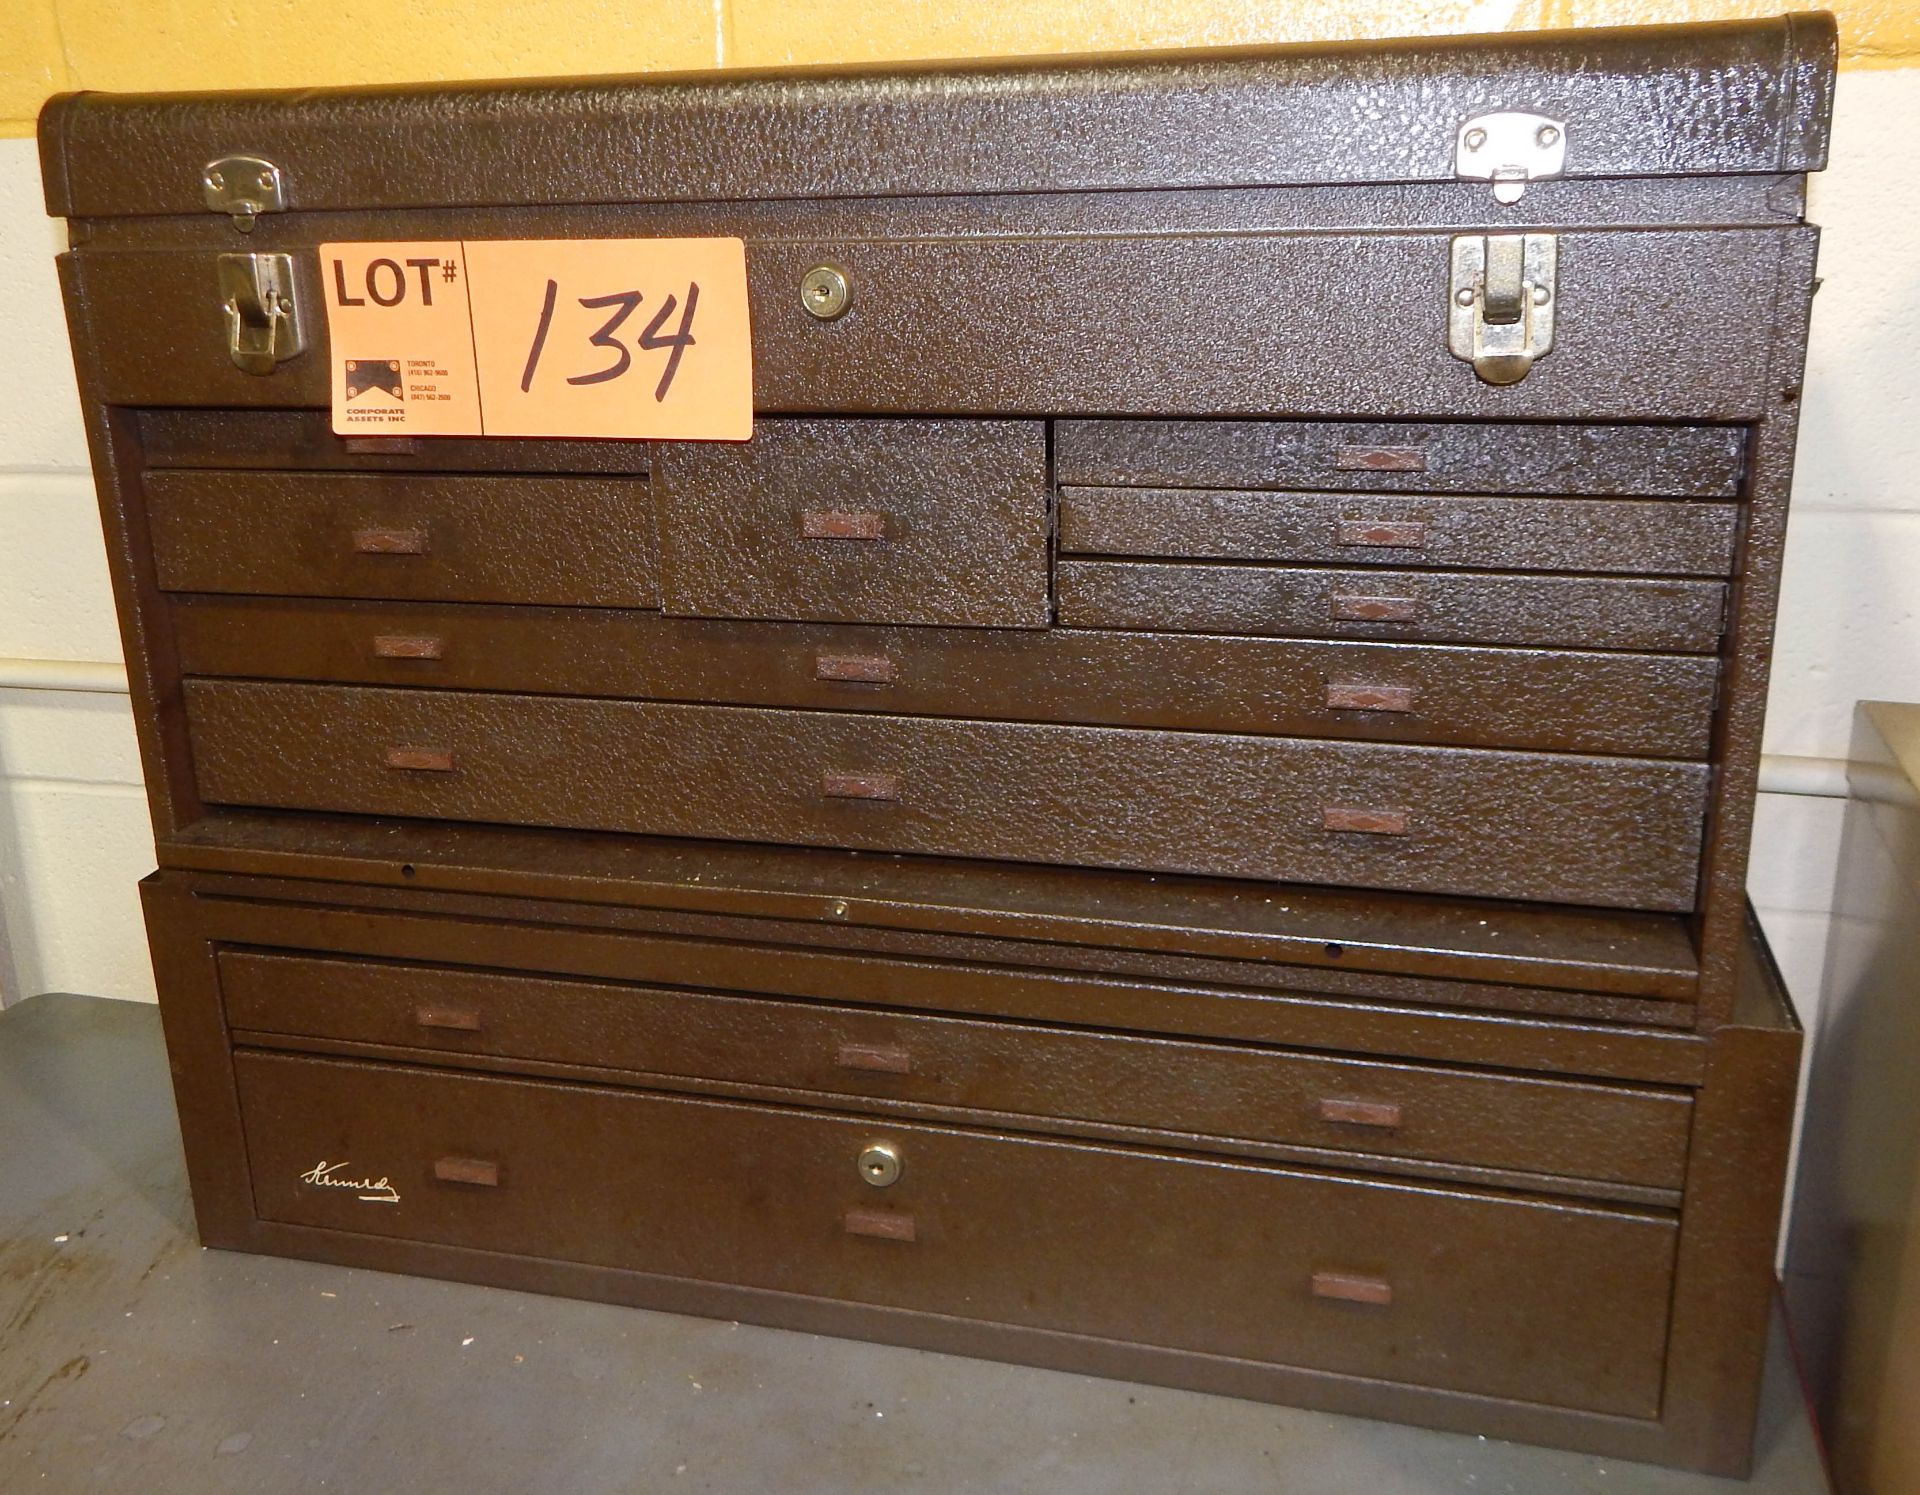 LOT/ KENNEDY TOOL BOX WITH CONTENTS